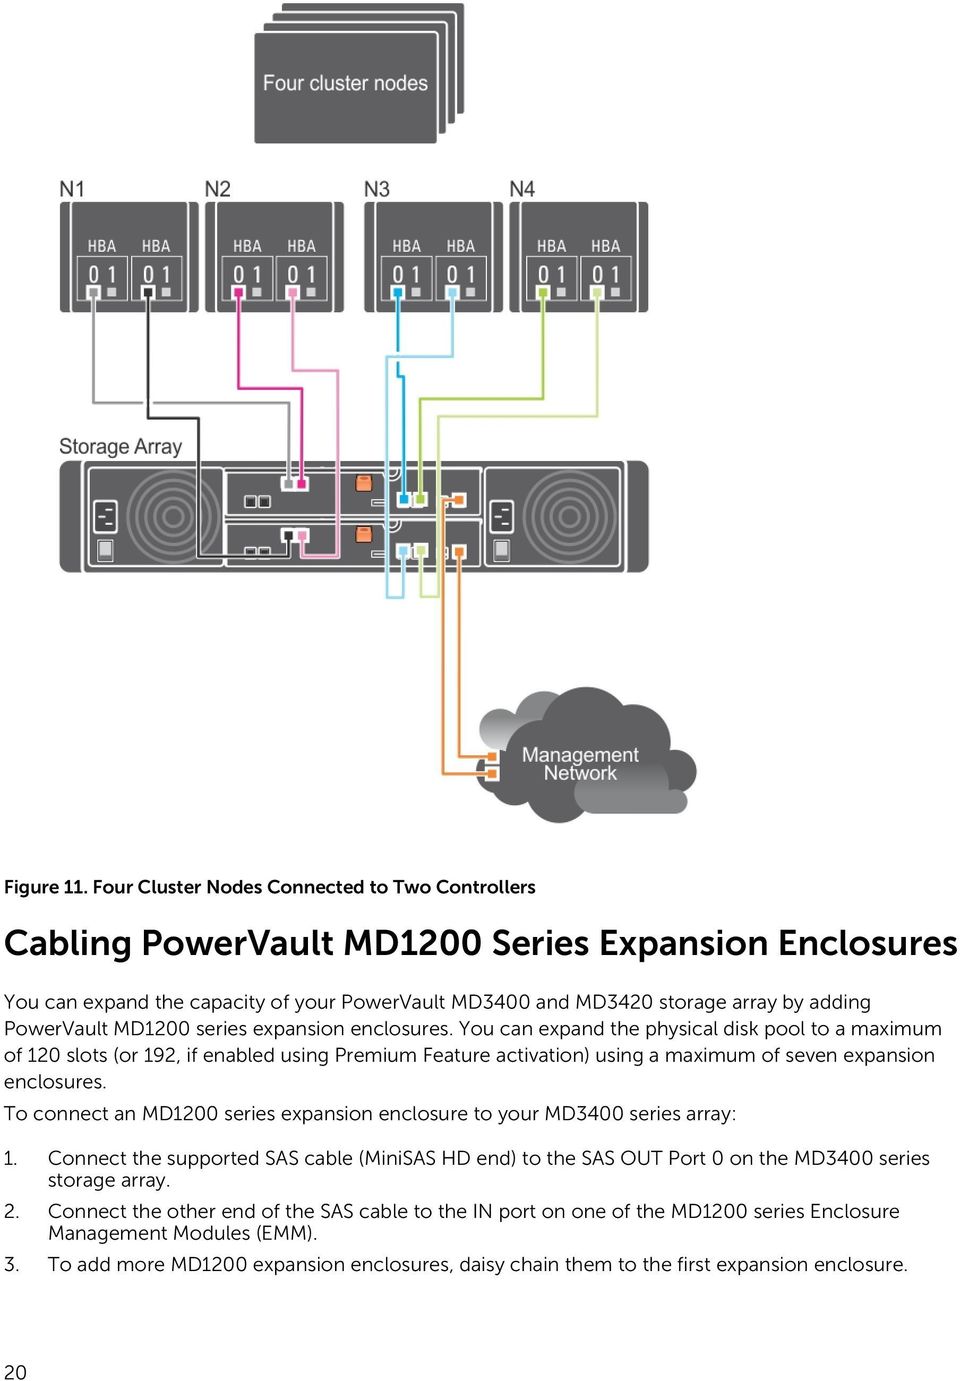 PowerVault MD1200 series expansion enclosures.